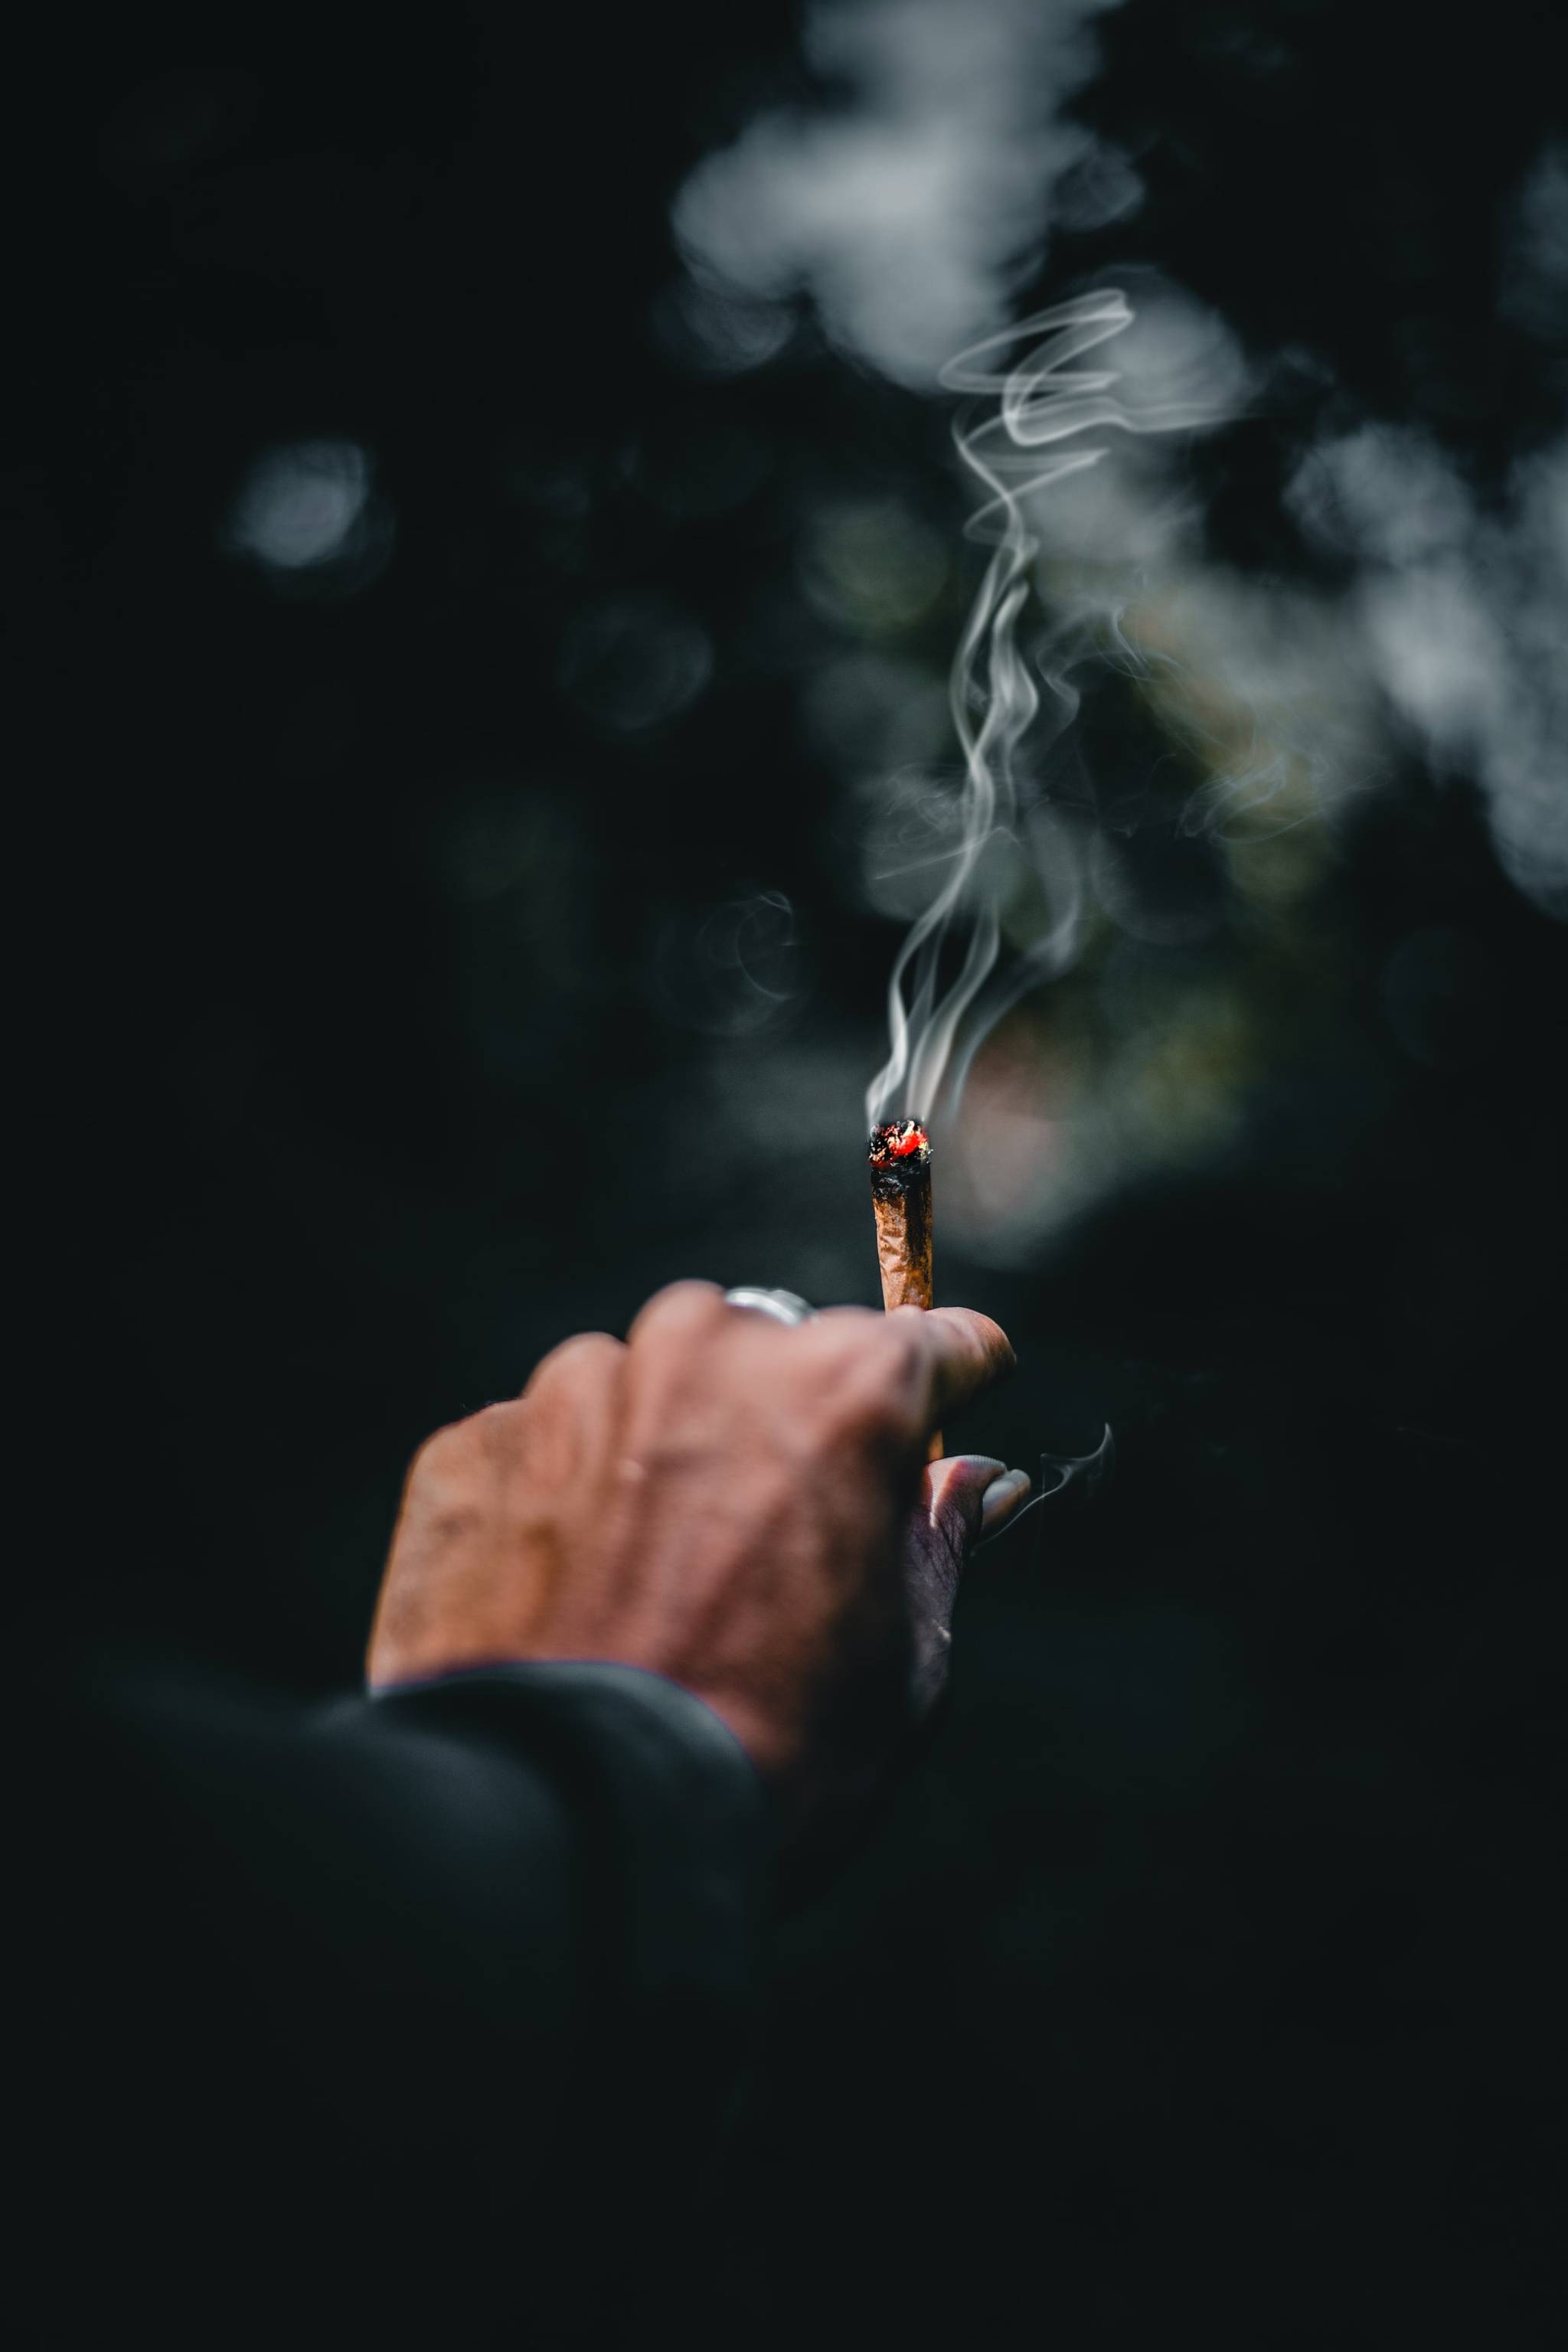 Older adults use cannabis to manage stress and illness